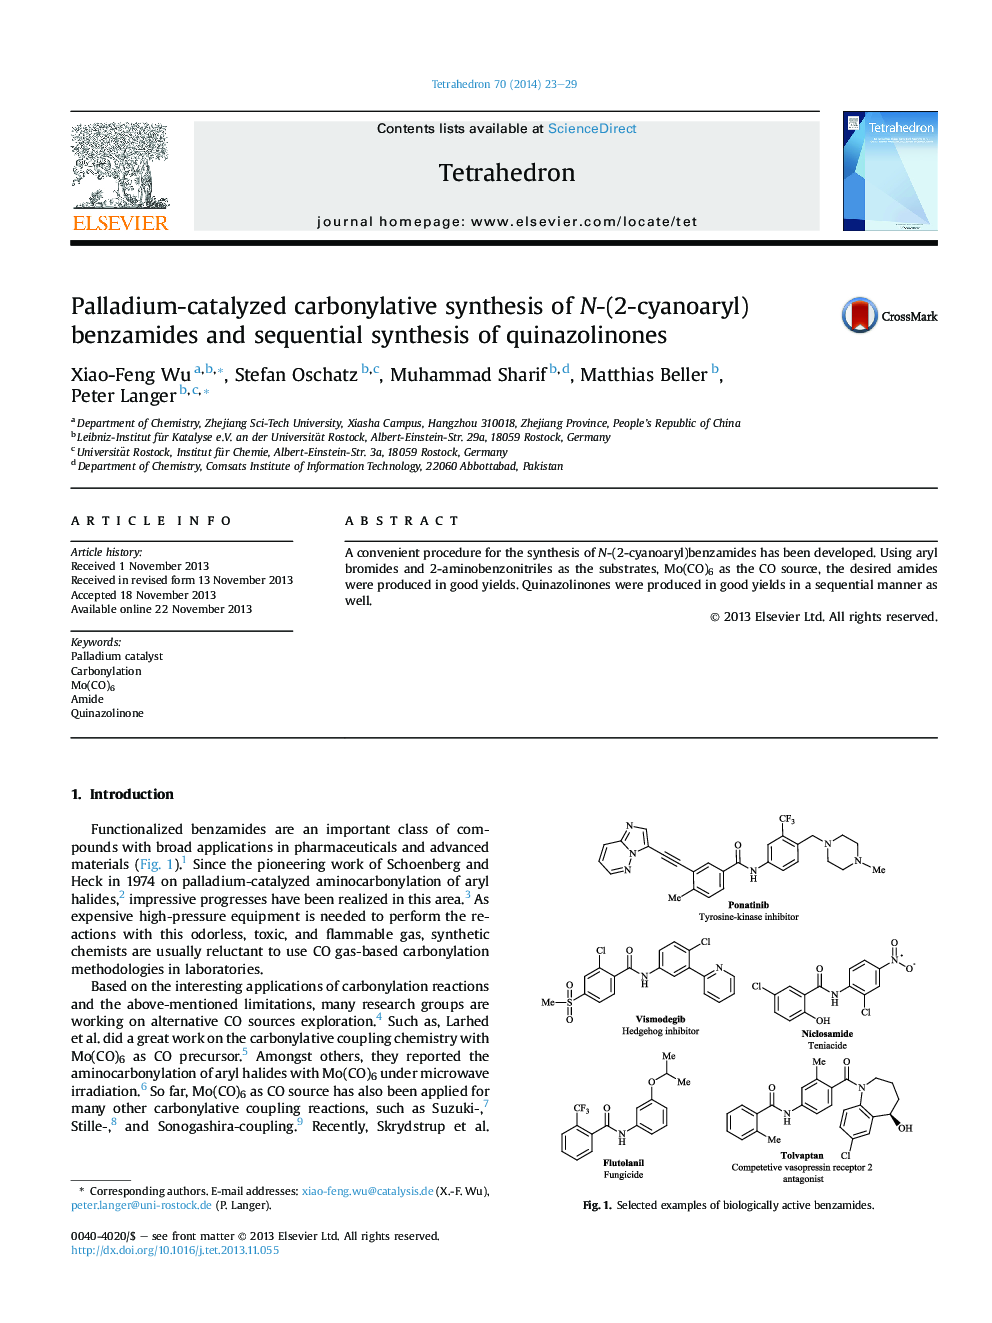 Palladium-catalyzed carbonylative synthesis of N-(2-cyanoaryl)benzamides and sequential synthesis of quinazolinones